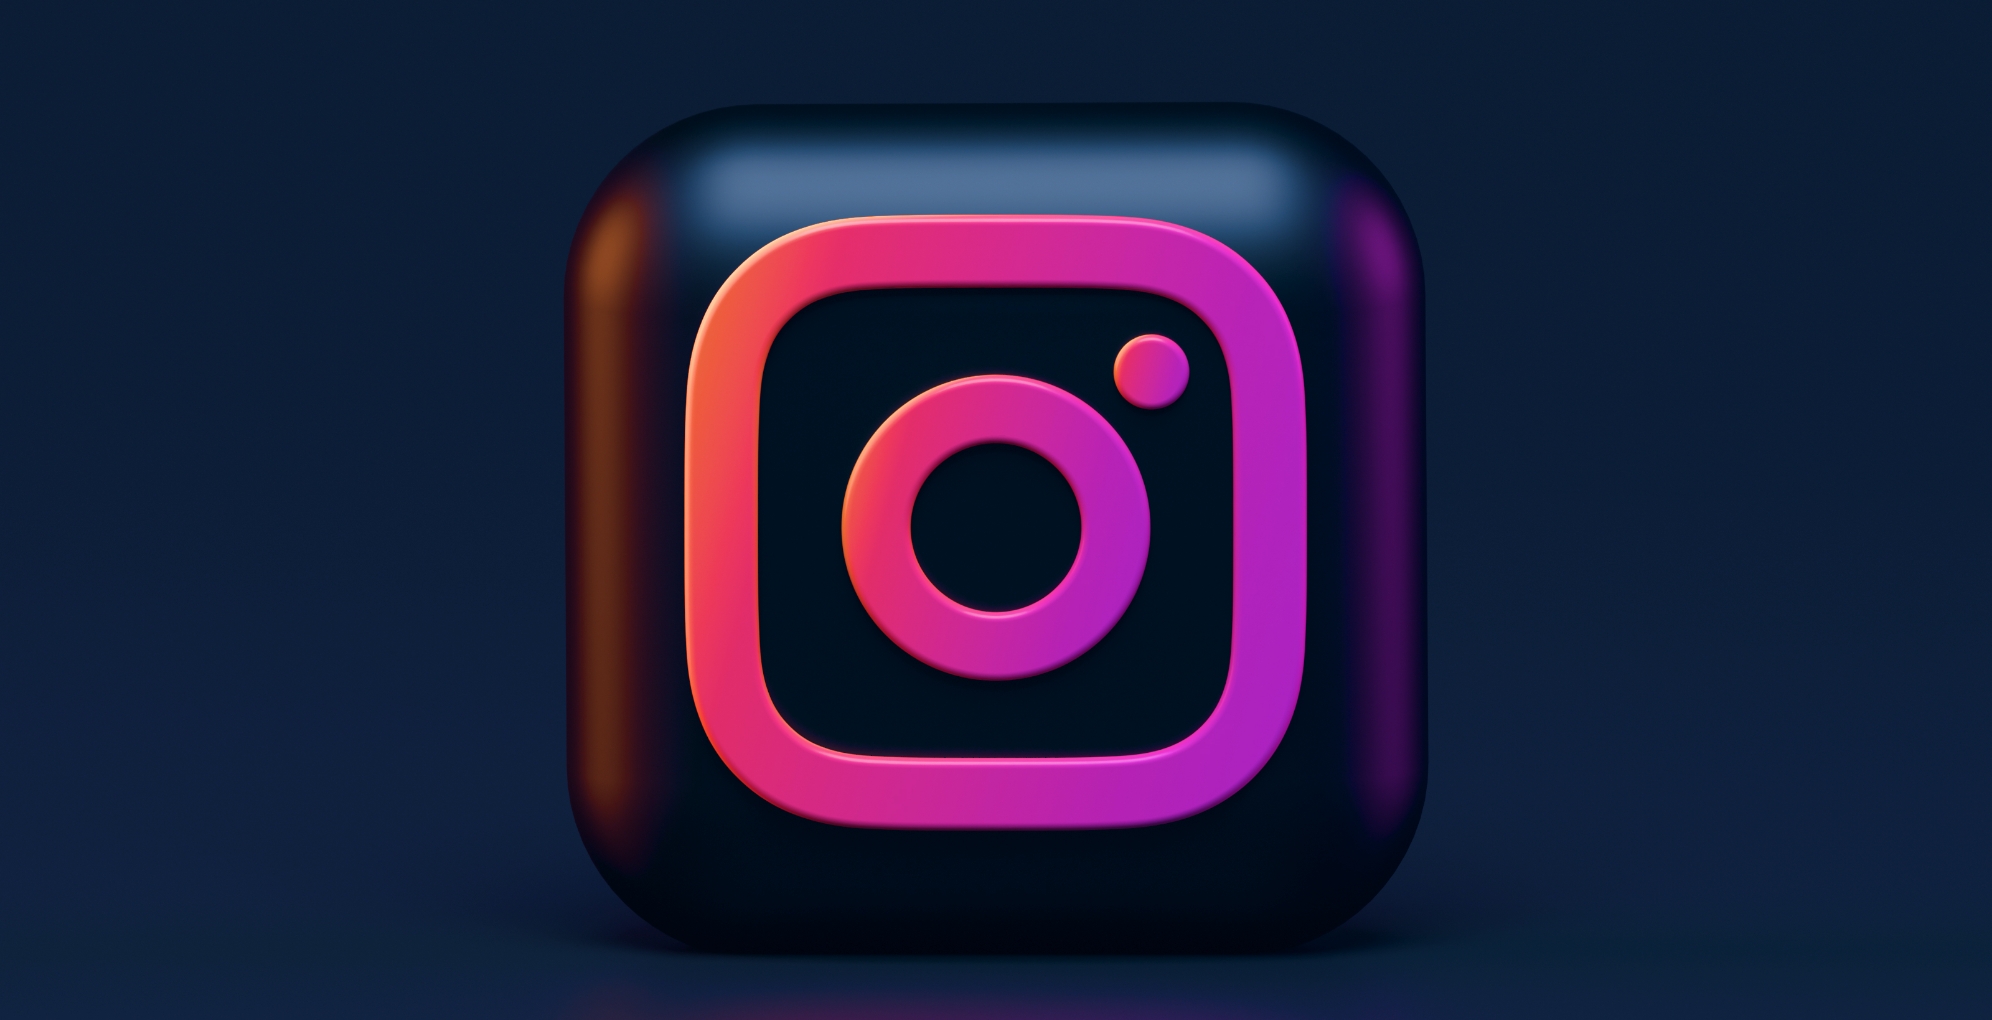 Instagram blue and red square logo.